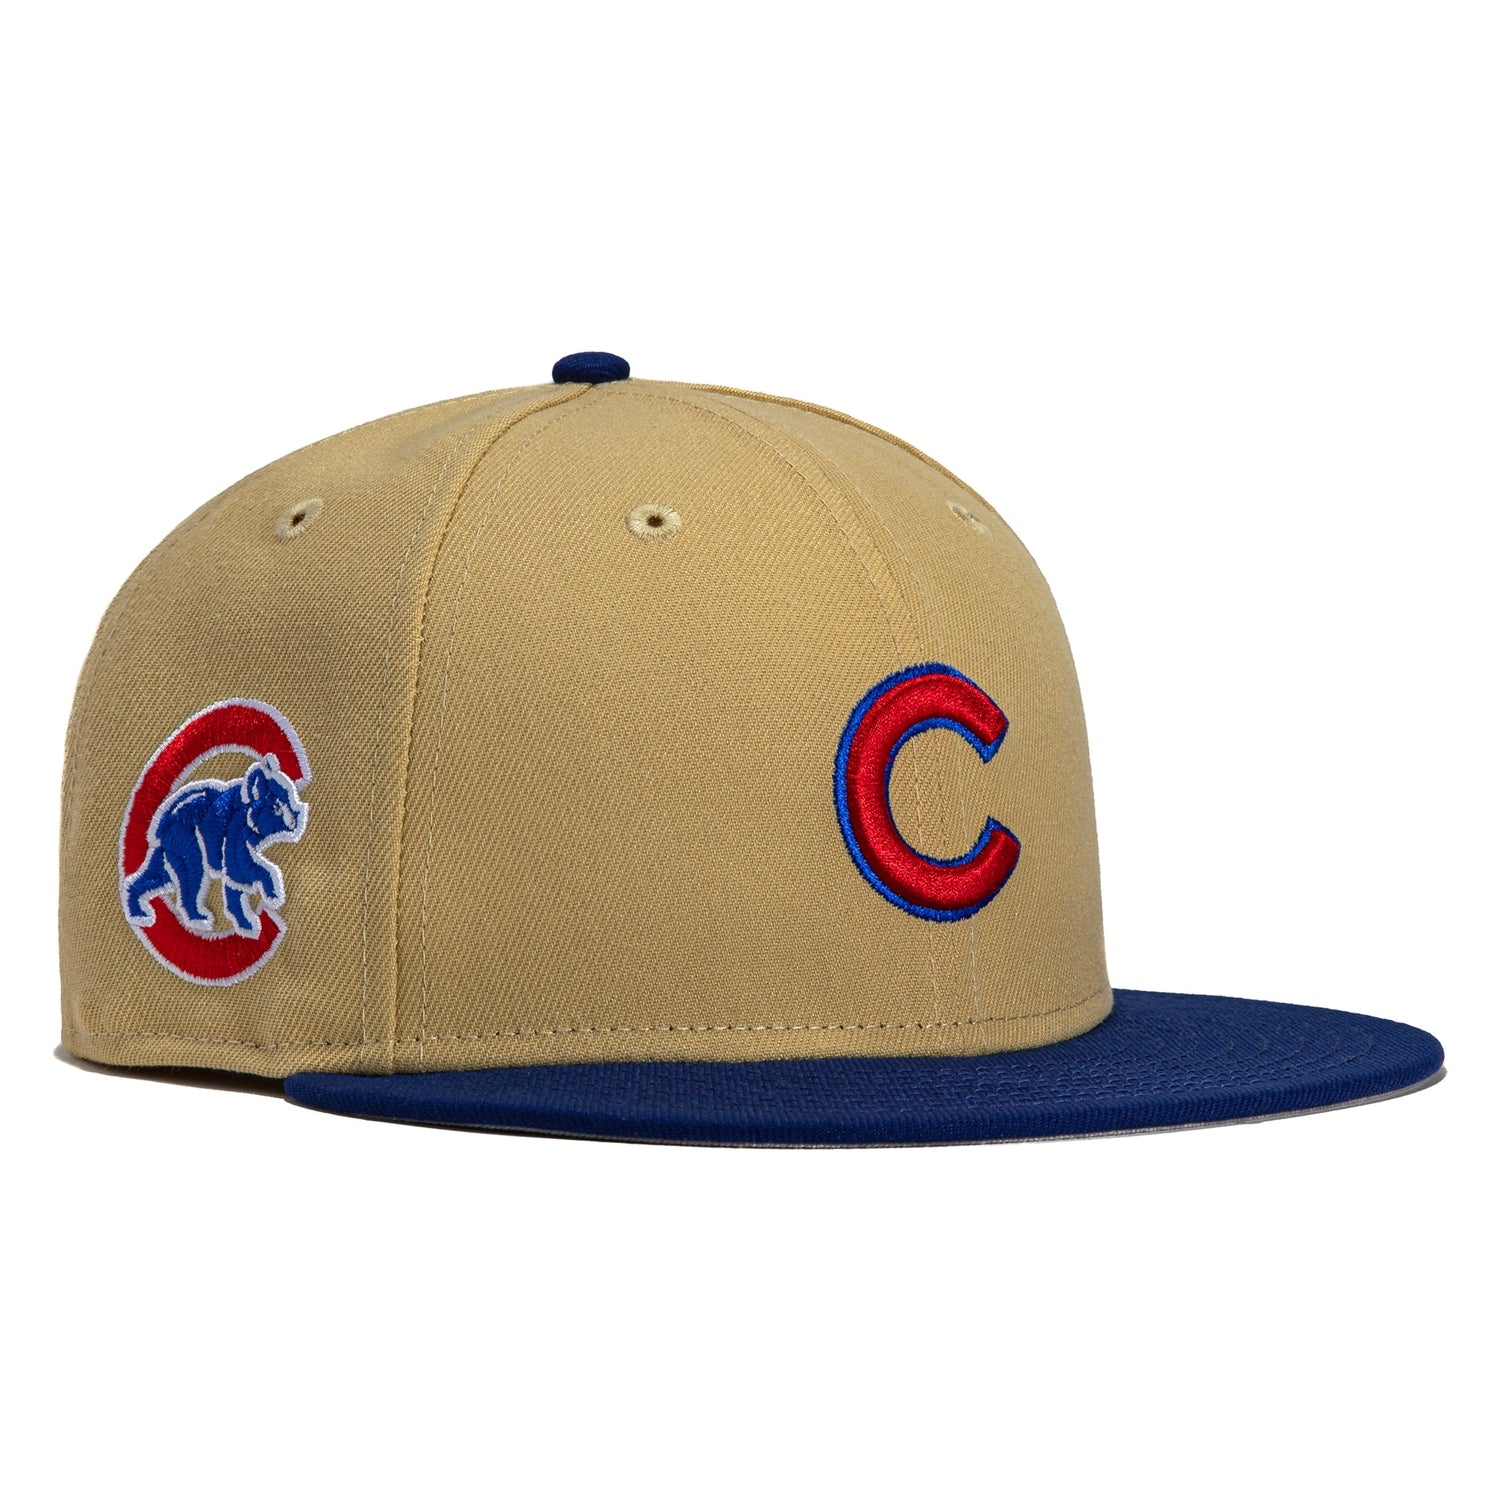 Chicago Cubs New Era MLB Fitted Hat 7 1/2